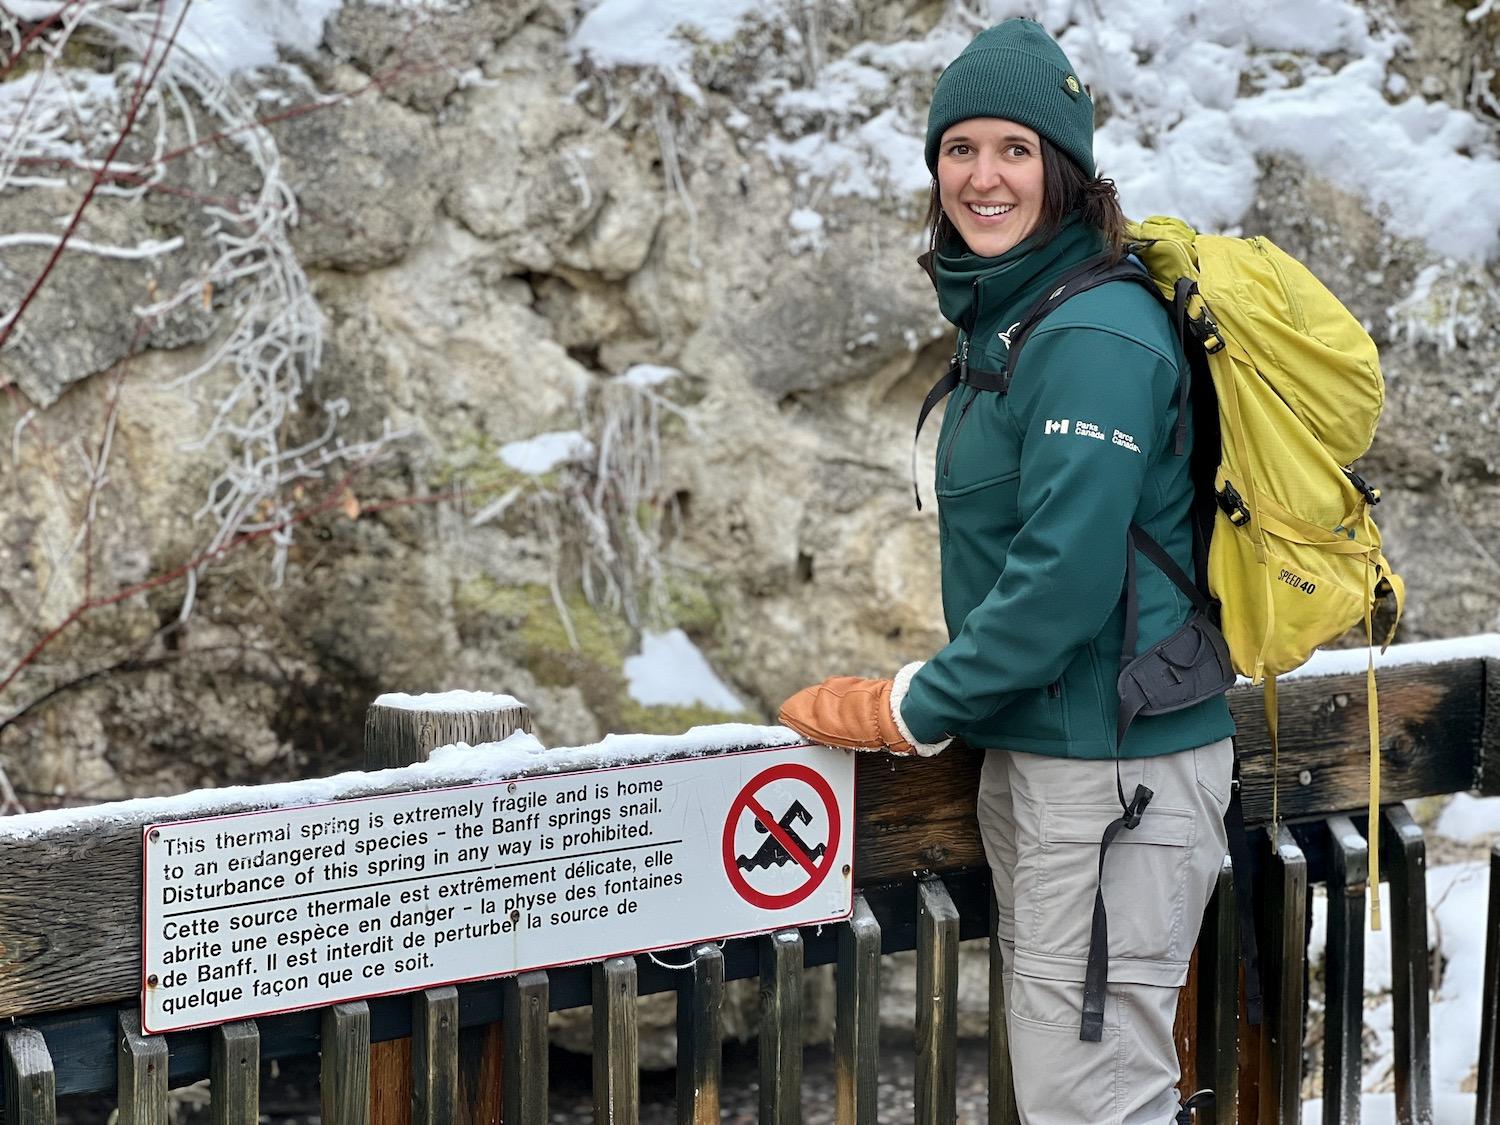 Resource conservation officer Kate Keenan stands by a warning sign that protects endangered Banff Springs Snails in Cave and Basin National Historic Site.